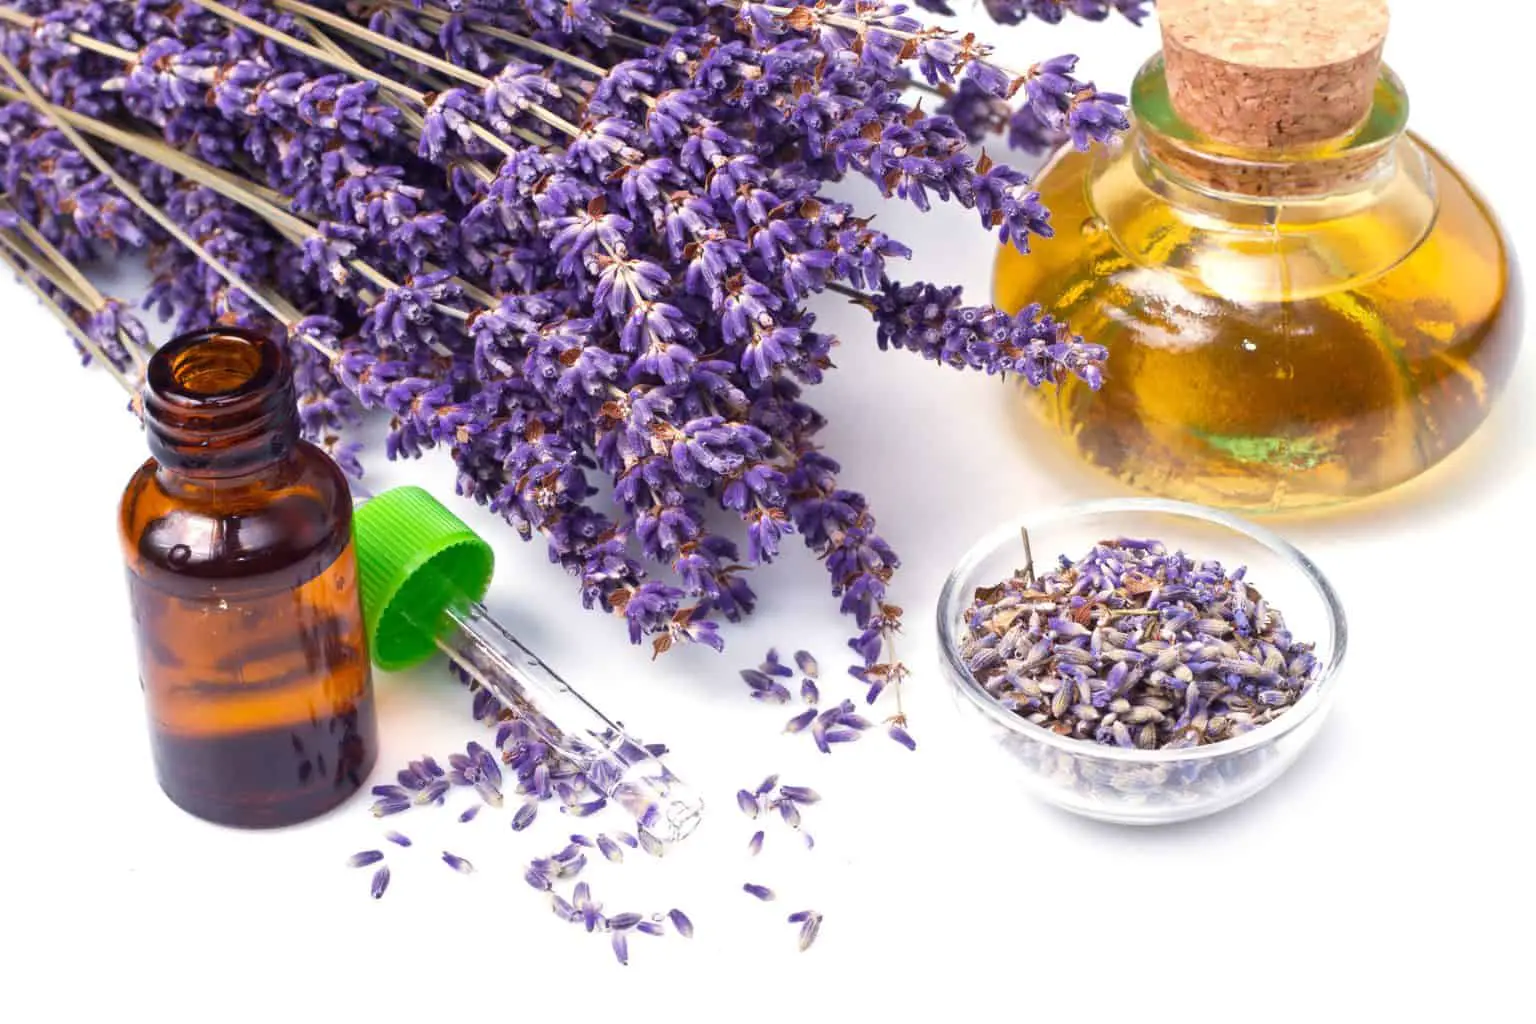 Lavender for Anxiety: The Best Way to Use This Calming Herb